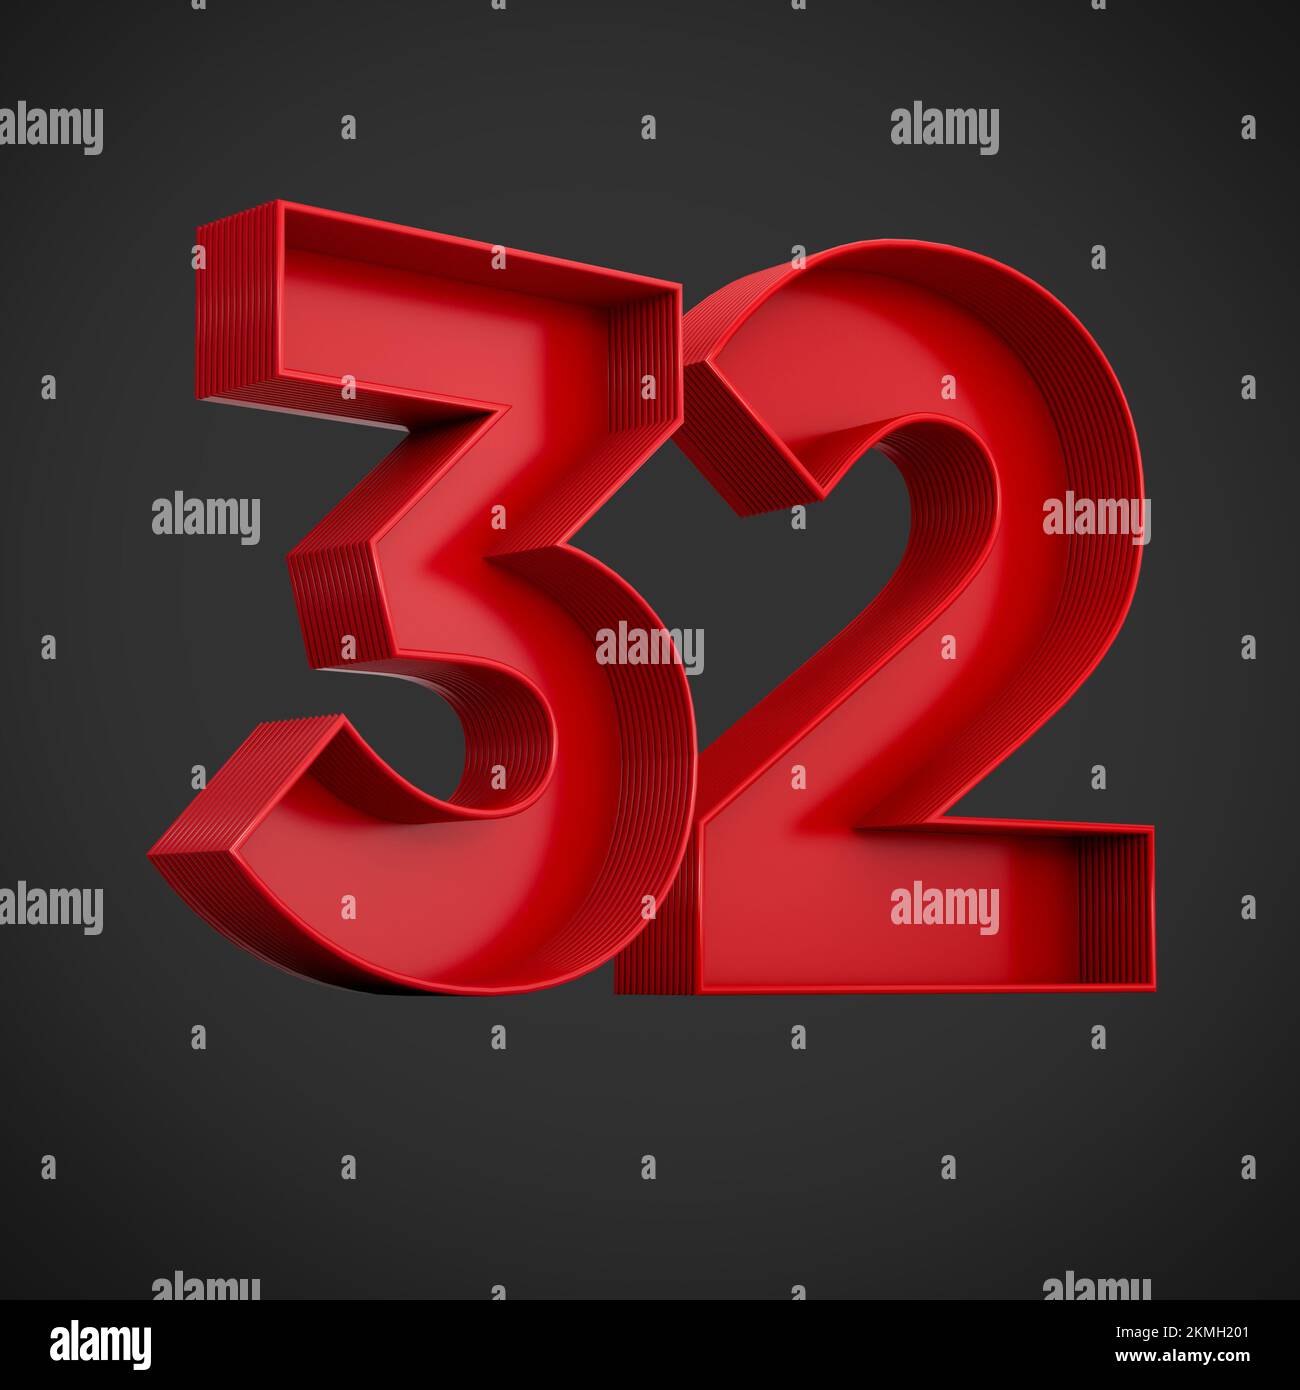 A 3d rendering of the number thirty-two in red over the black background - 32 icon Stock Photo